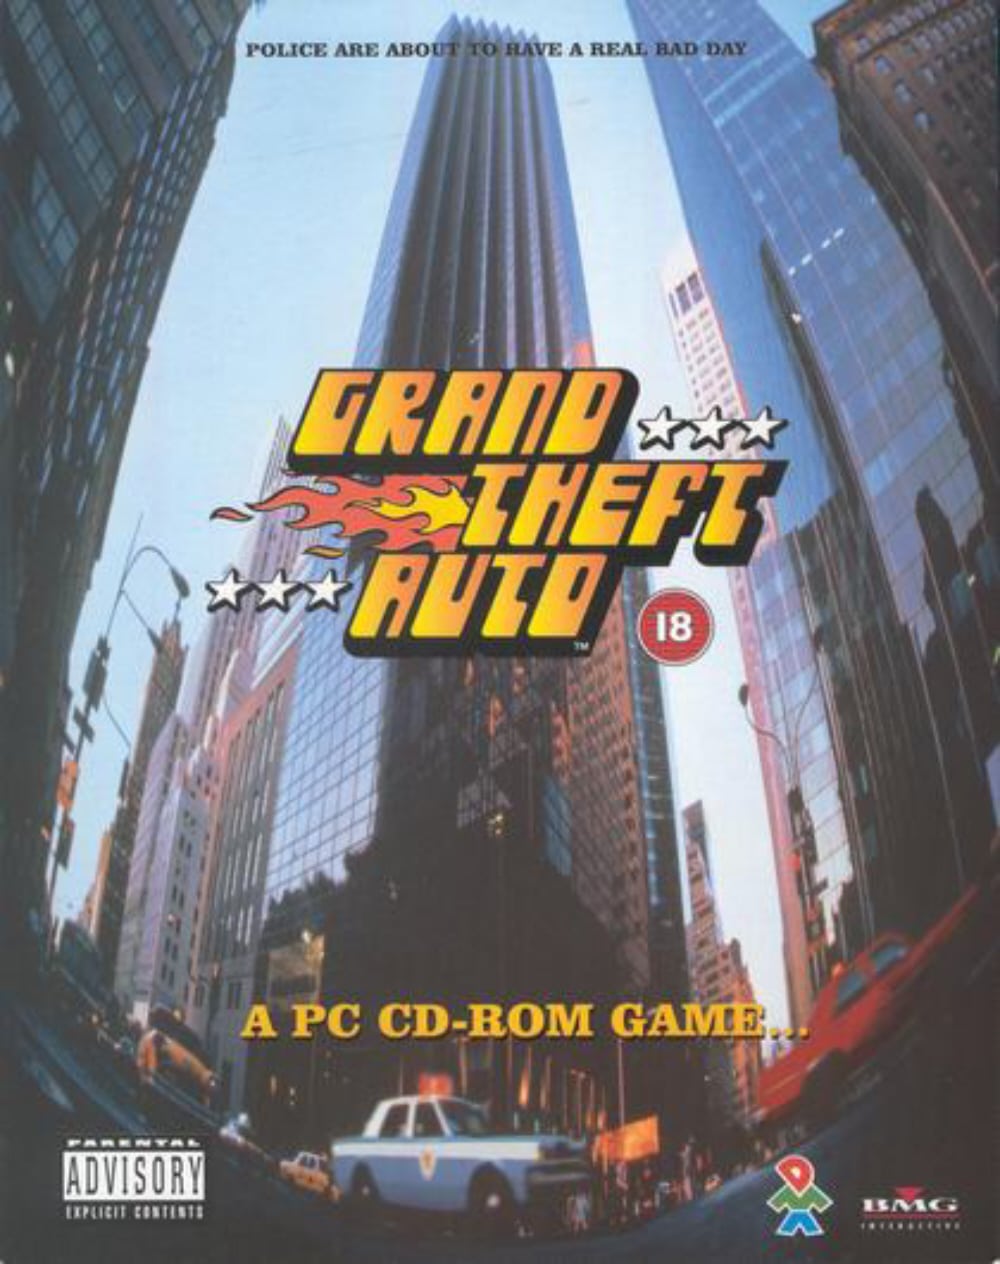 which was the first gta game